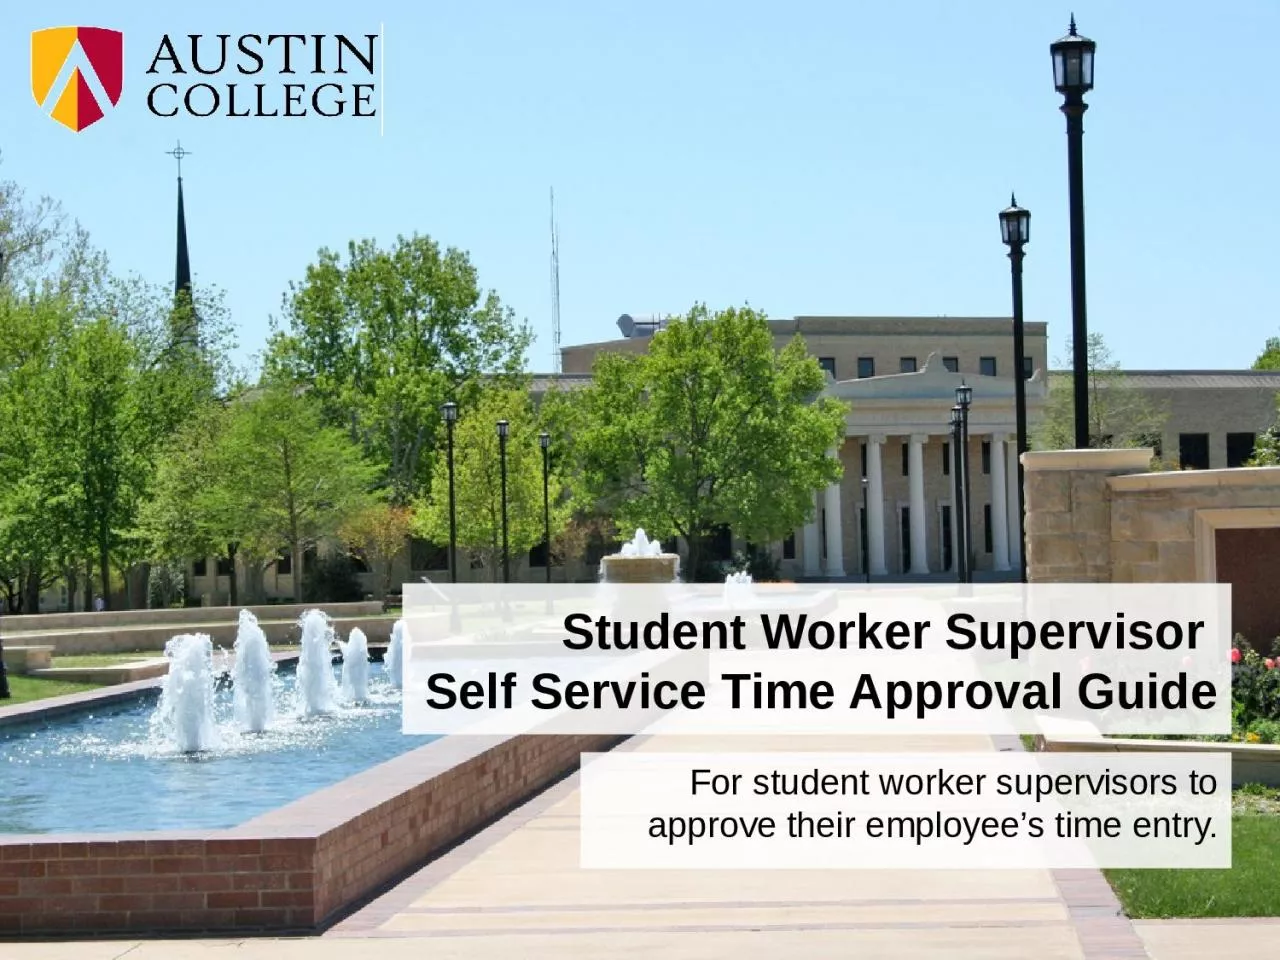 For student worker supervisors to approve their employee’s time entry.